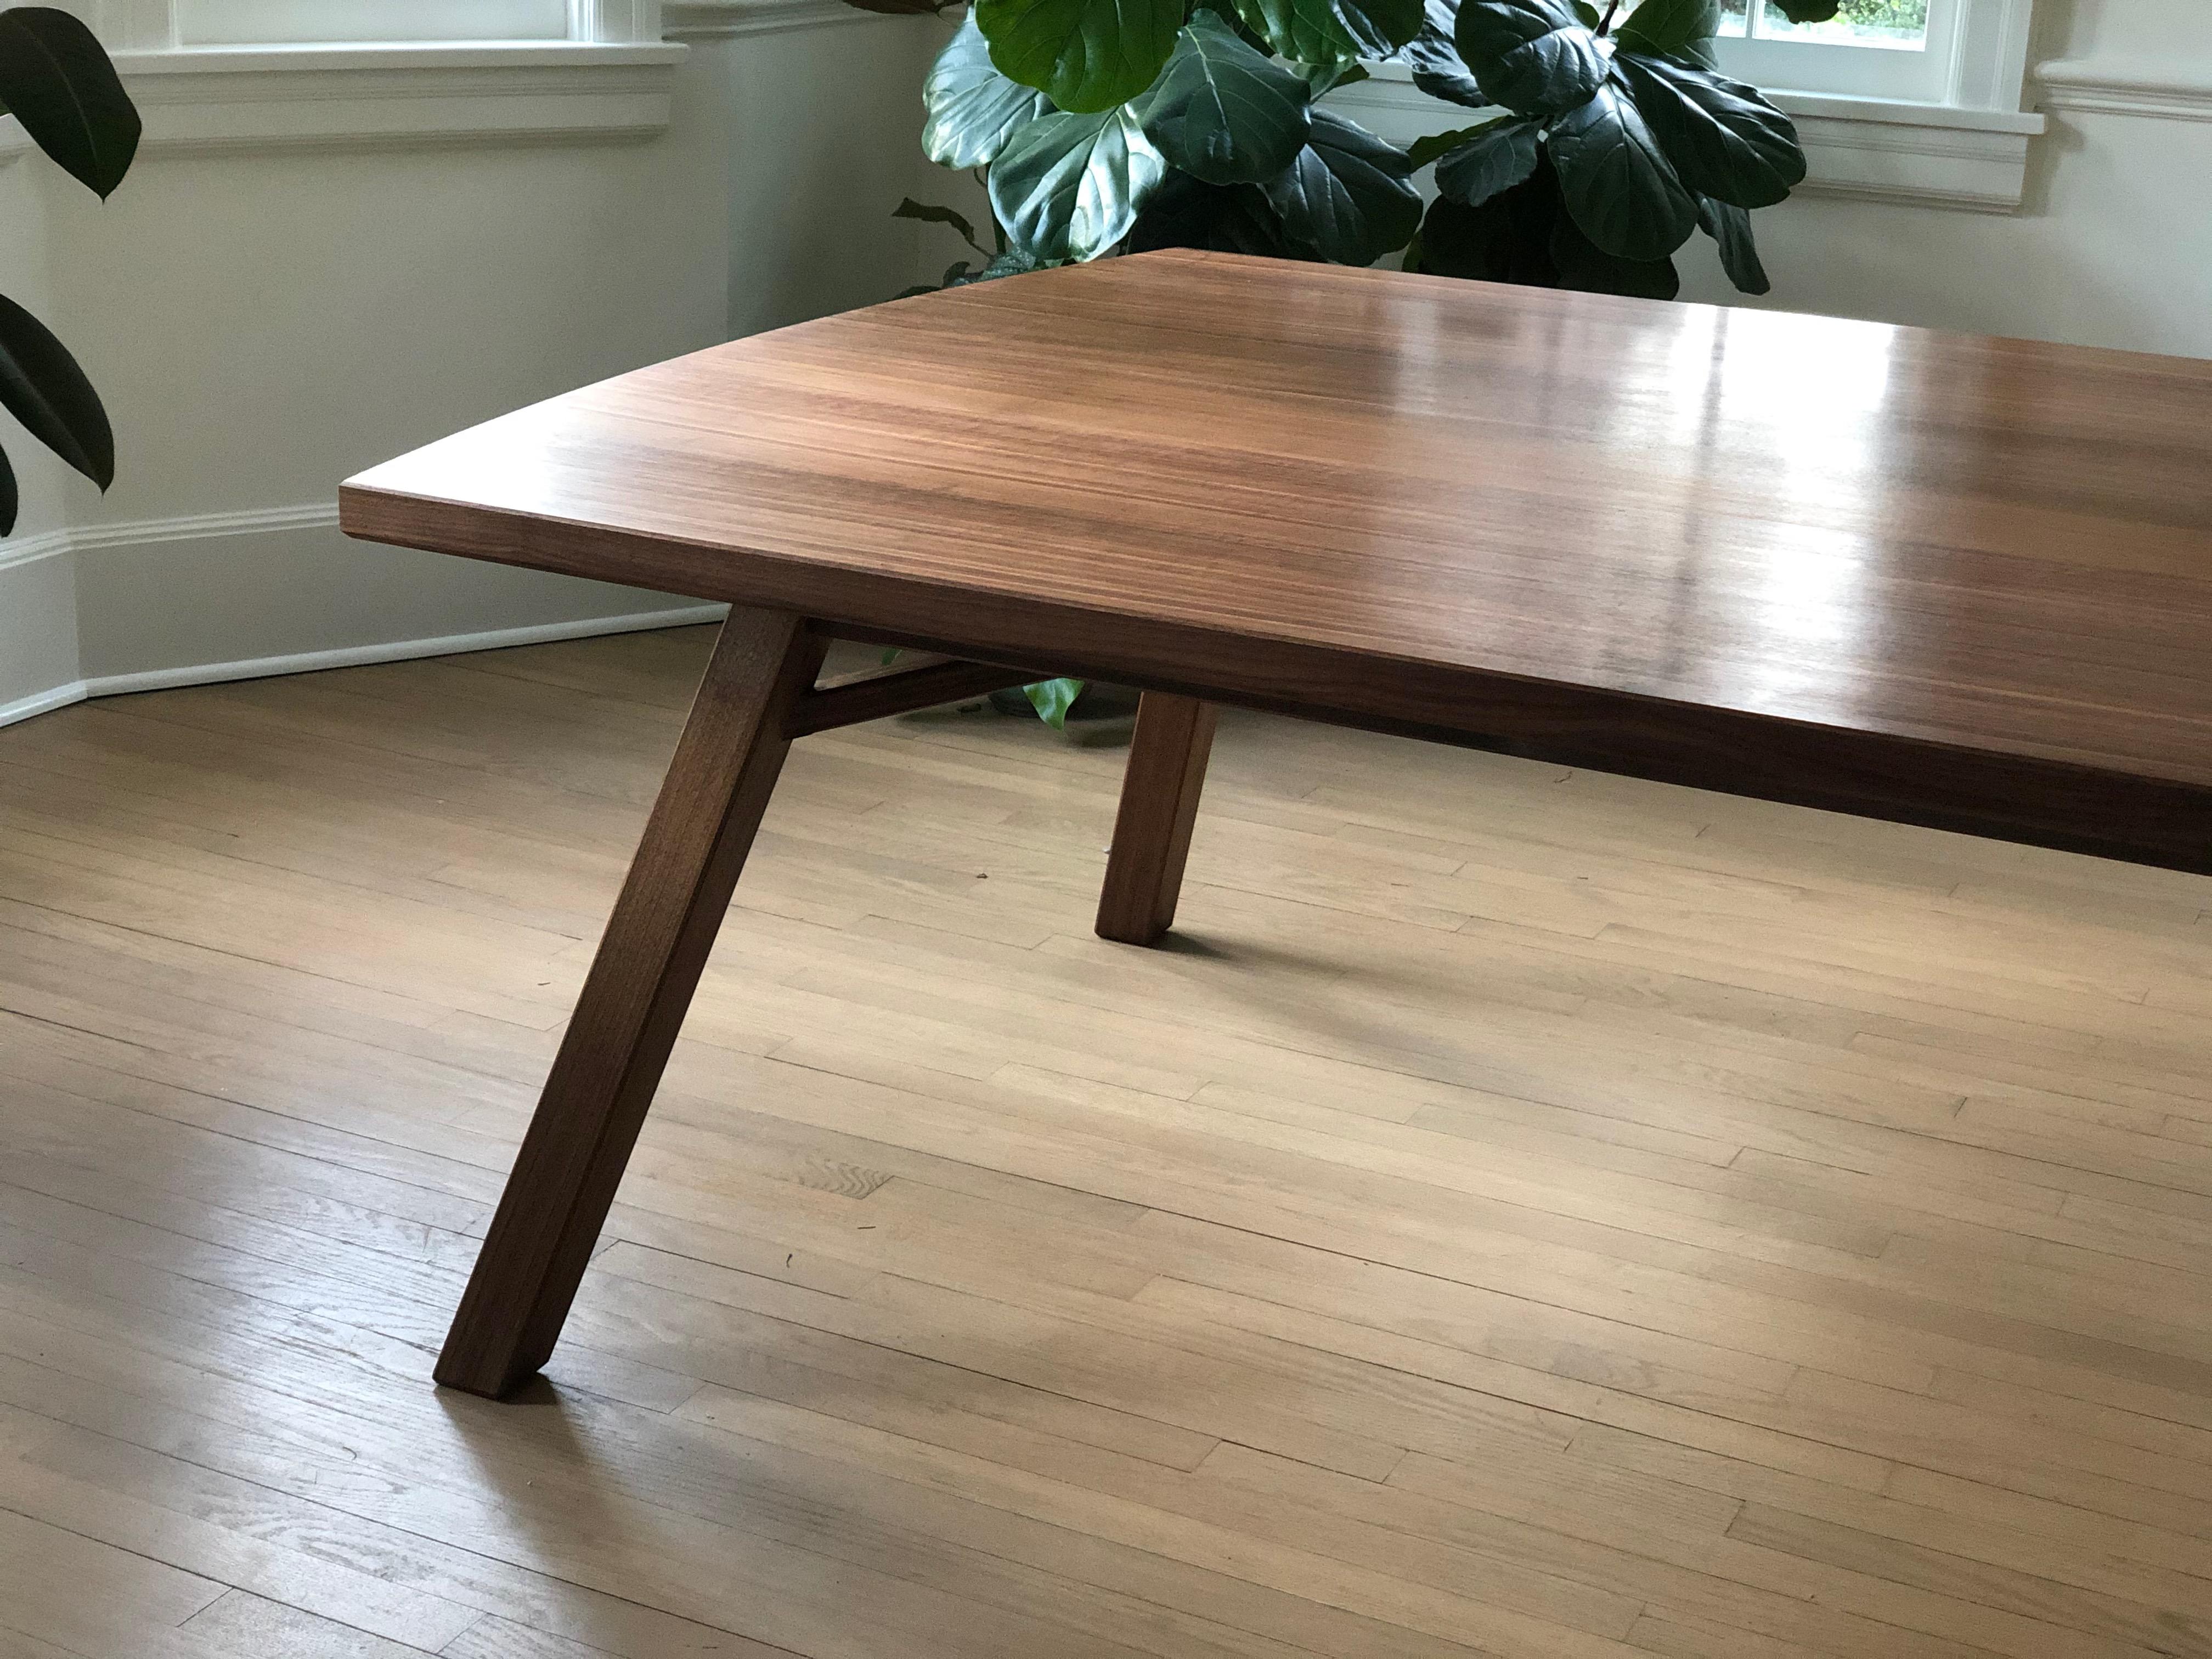 Splayed Leg Dining Table in Quartersawn Walnut In New Condition For Sale In Princeton, NJ